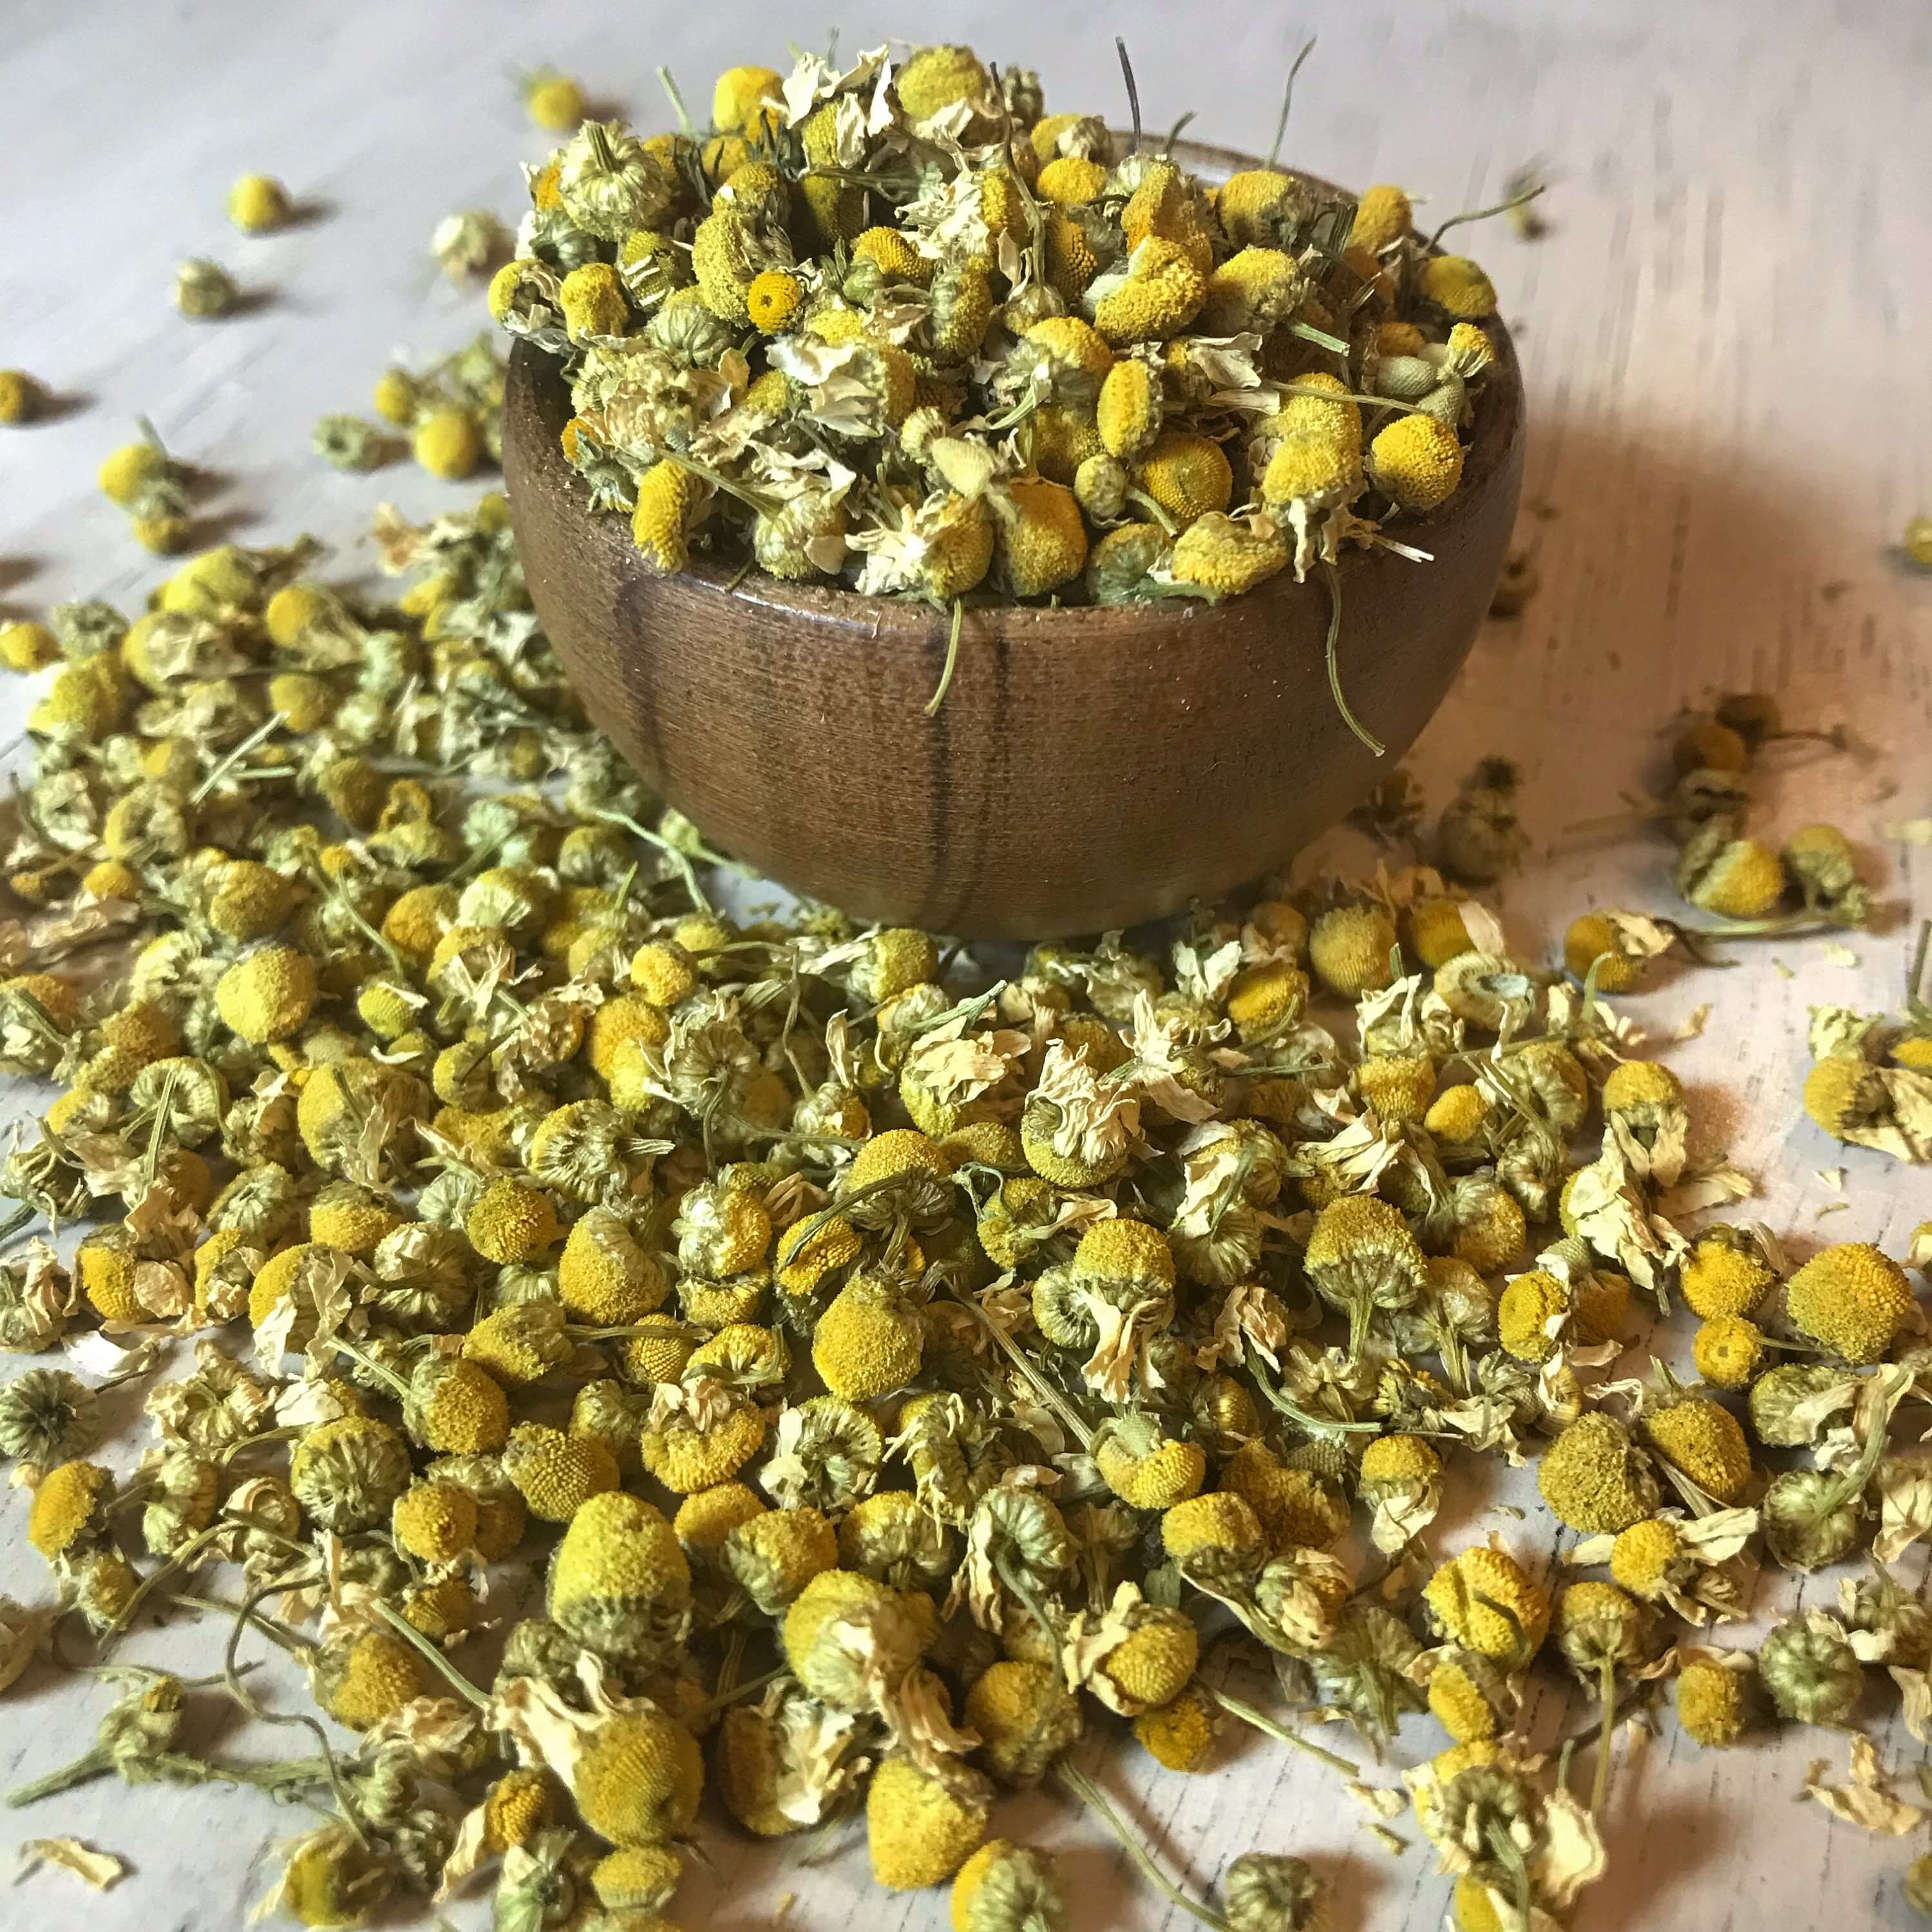 Organic dried chamomile flowers spilling from a natural wooden bowl onto a rustic surface, highlighting the premium quality for teas and aromatherapy